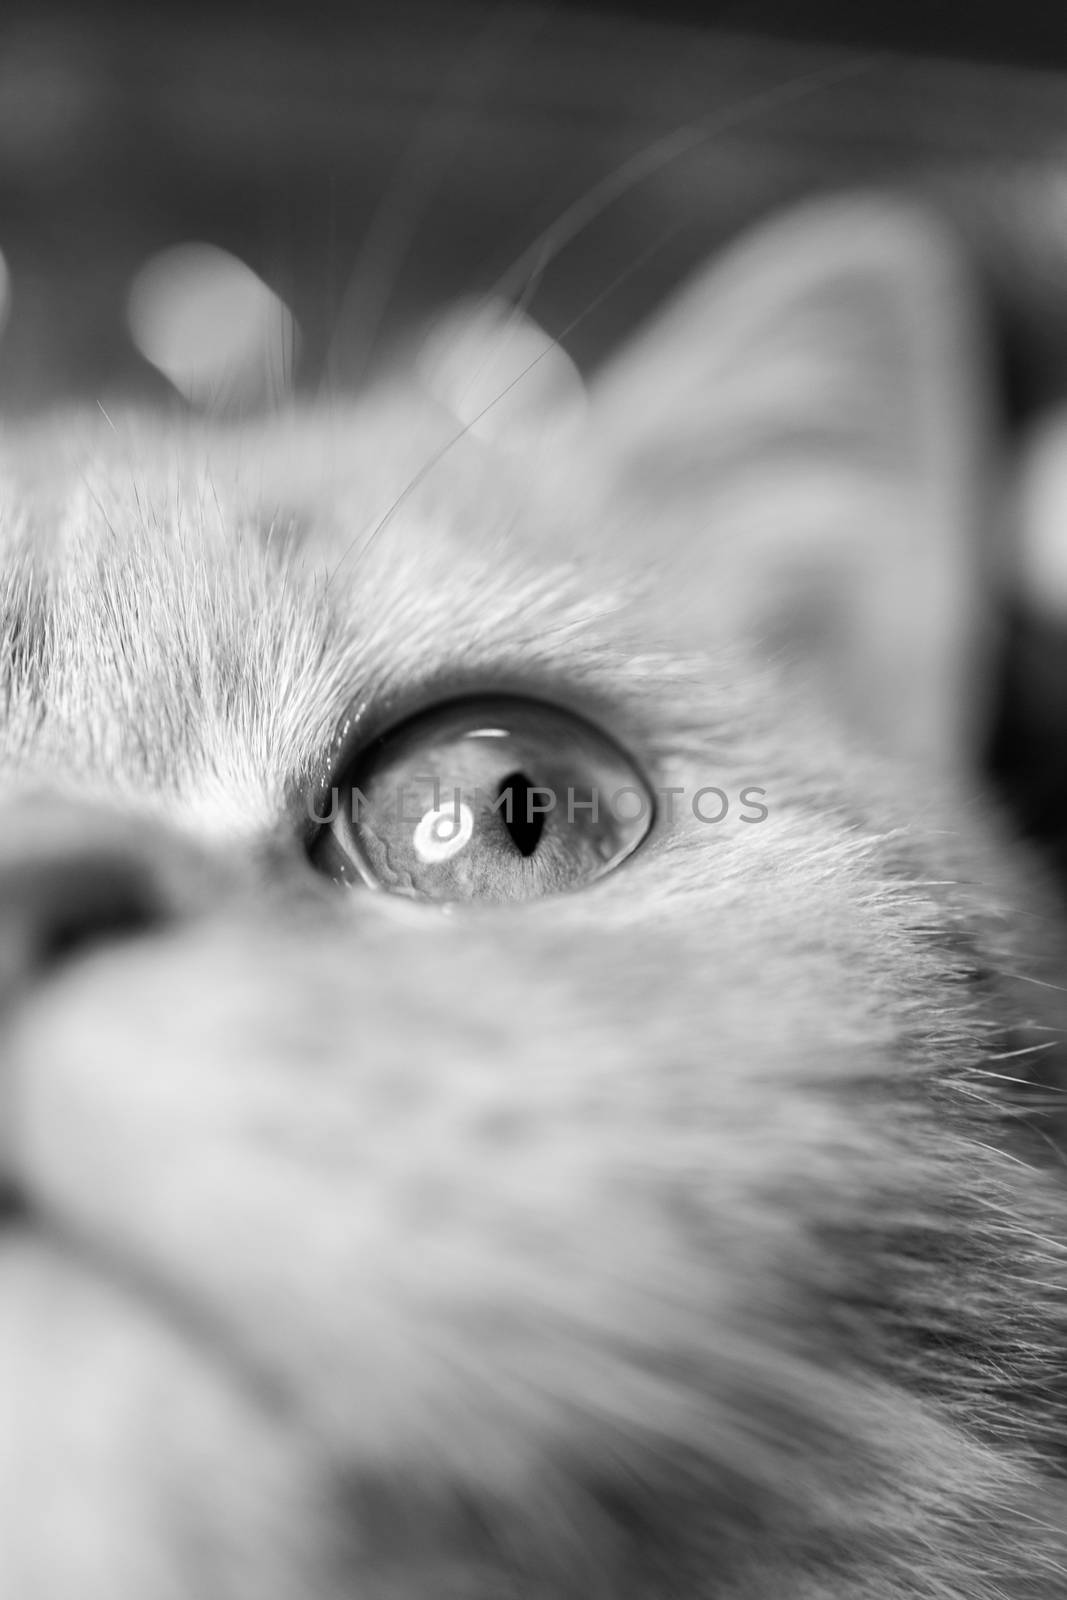 Temperamental british domestic cat looking up with one eye. Closeup view. Black and white photo. Monochrome photo with blurred background. by alexsdriver